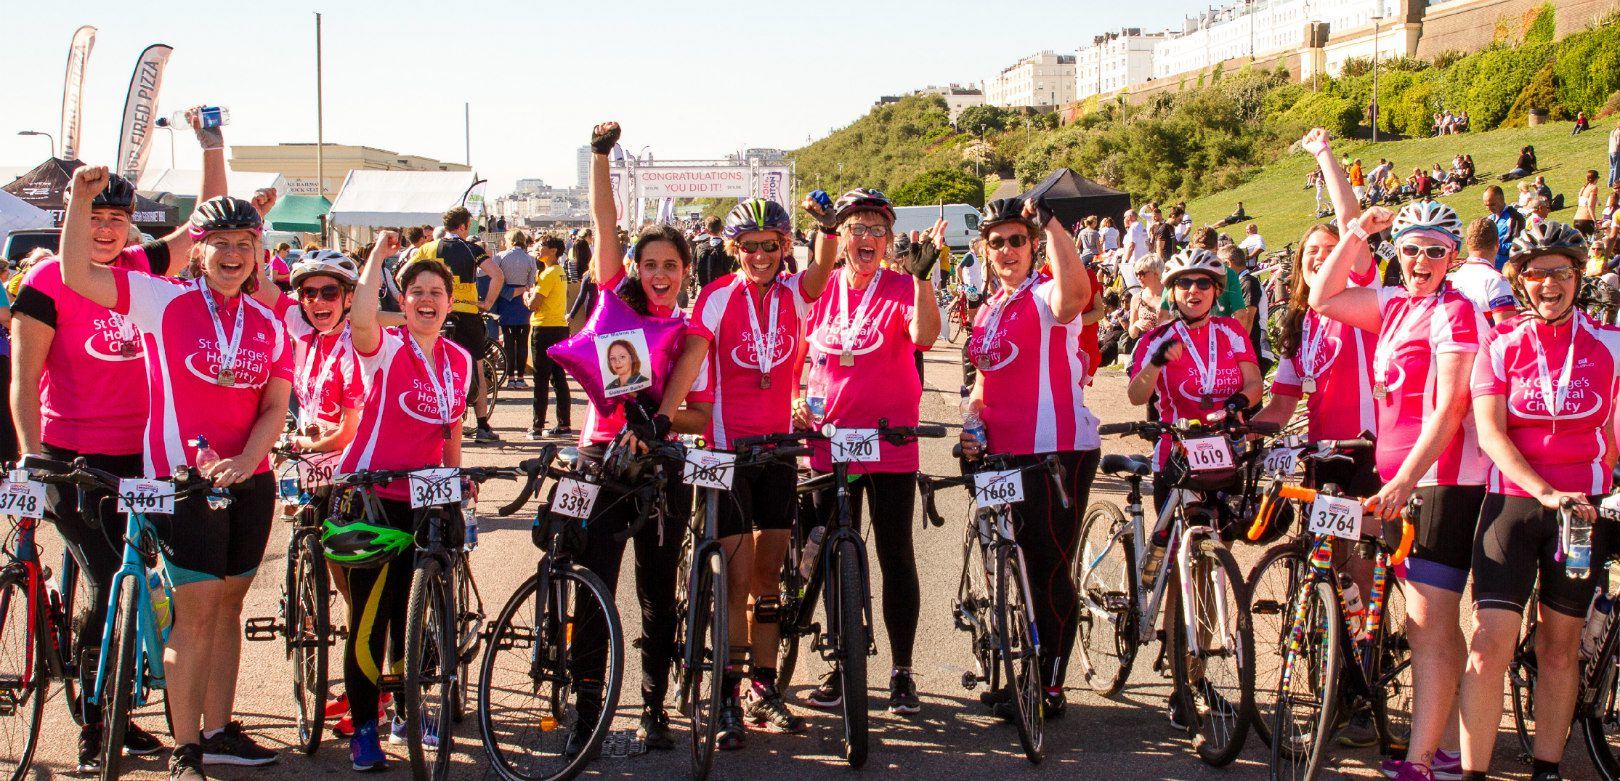 Female cycling team finish London to Brighton Cycle Ride 2018